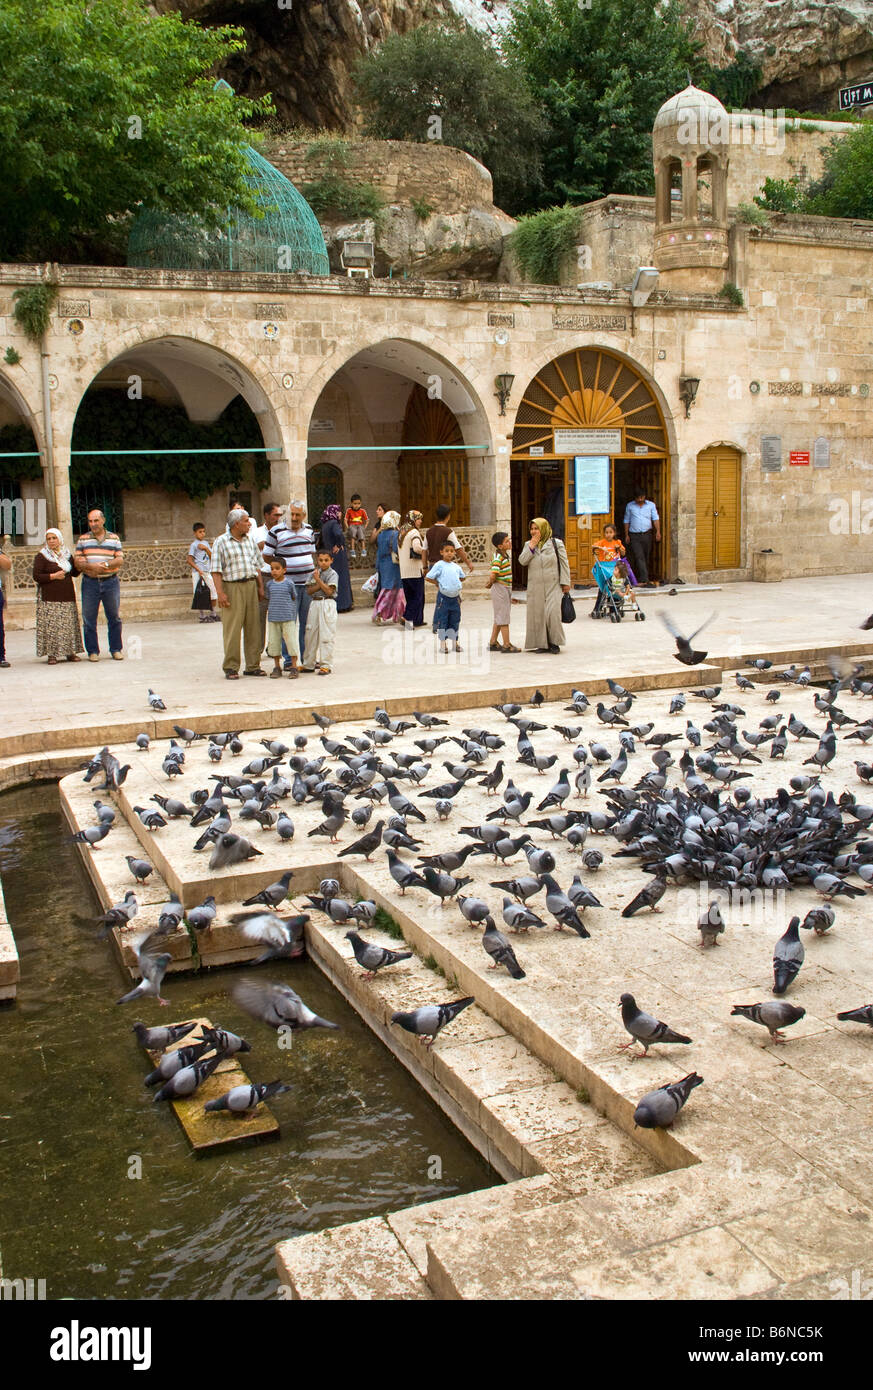 Sanliurfa (Urfa) Cave of Prophet Abraham, birthplace entrance with pigeons and pilgrims filling courtyard Stock Photo